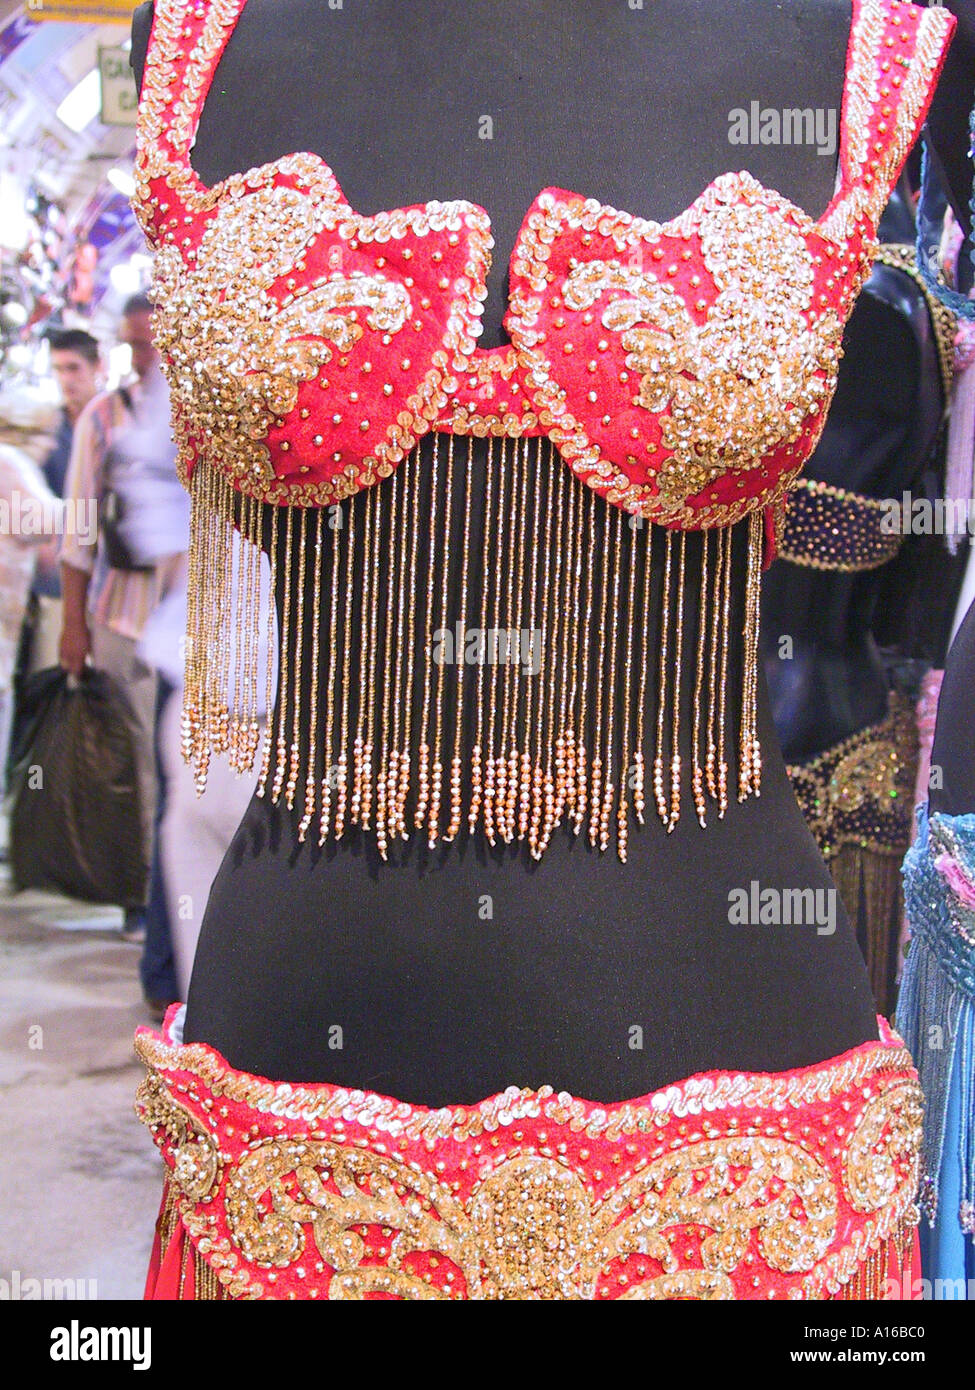 Belly dancer clothes in the Grand Bazaar Istanbul - 2010 European Capital of Culture - Turkey Stock Photo